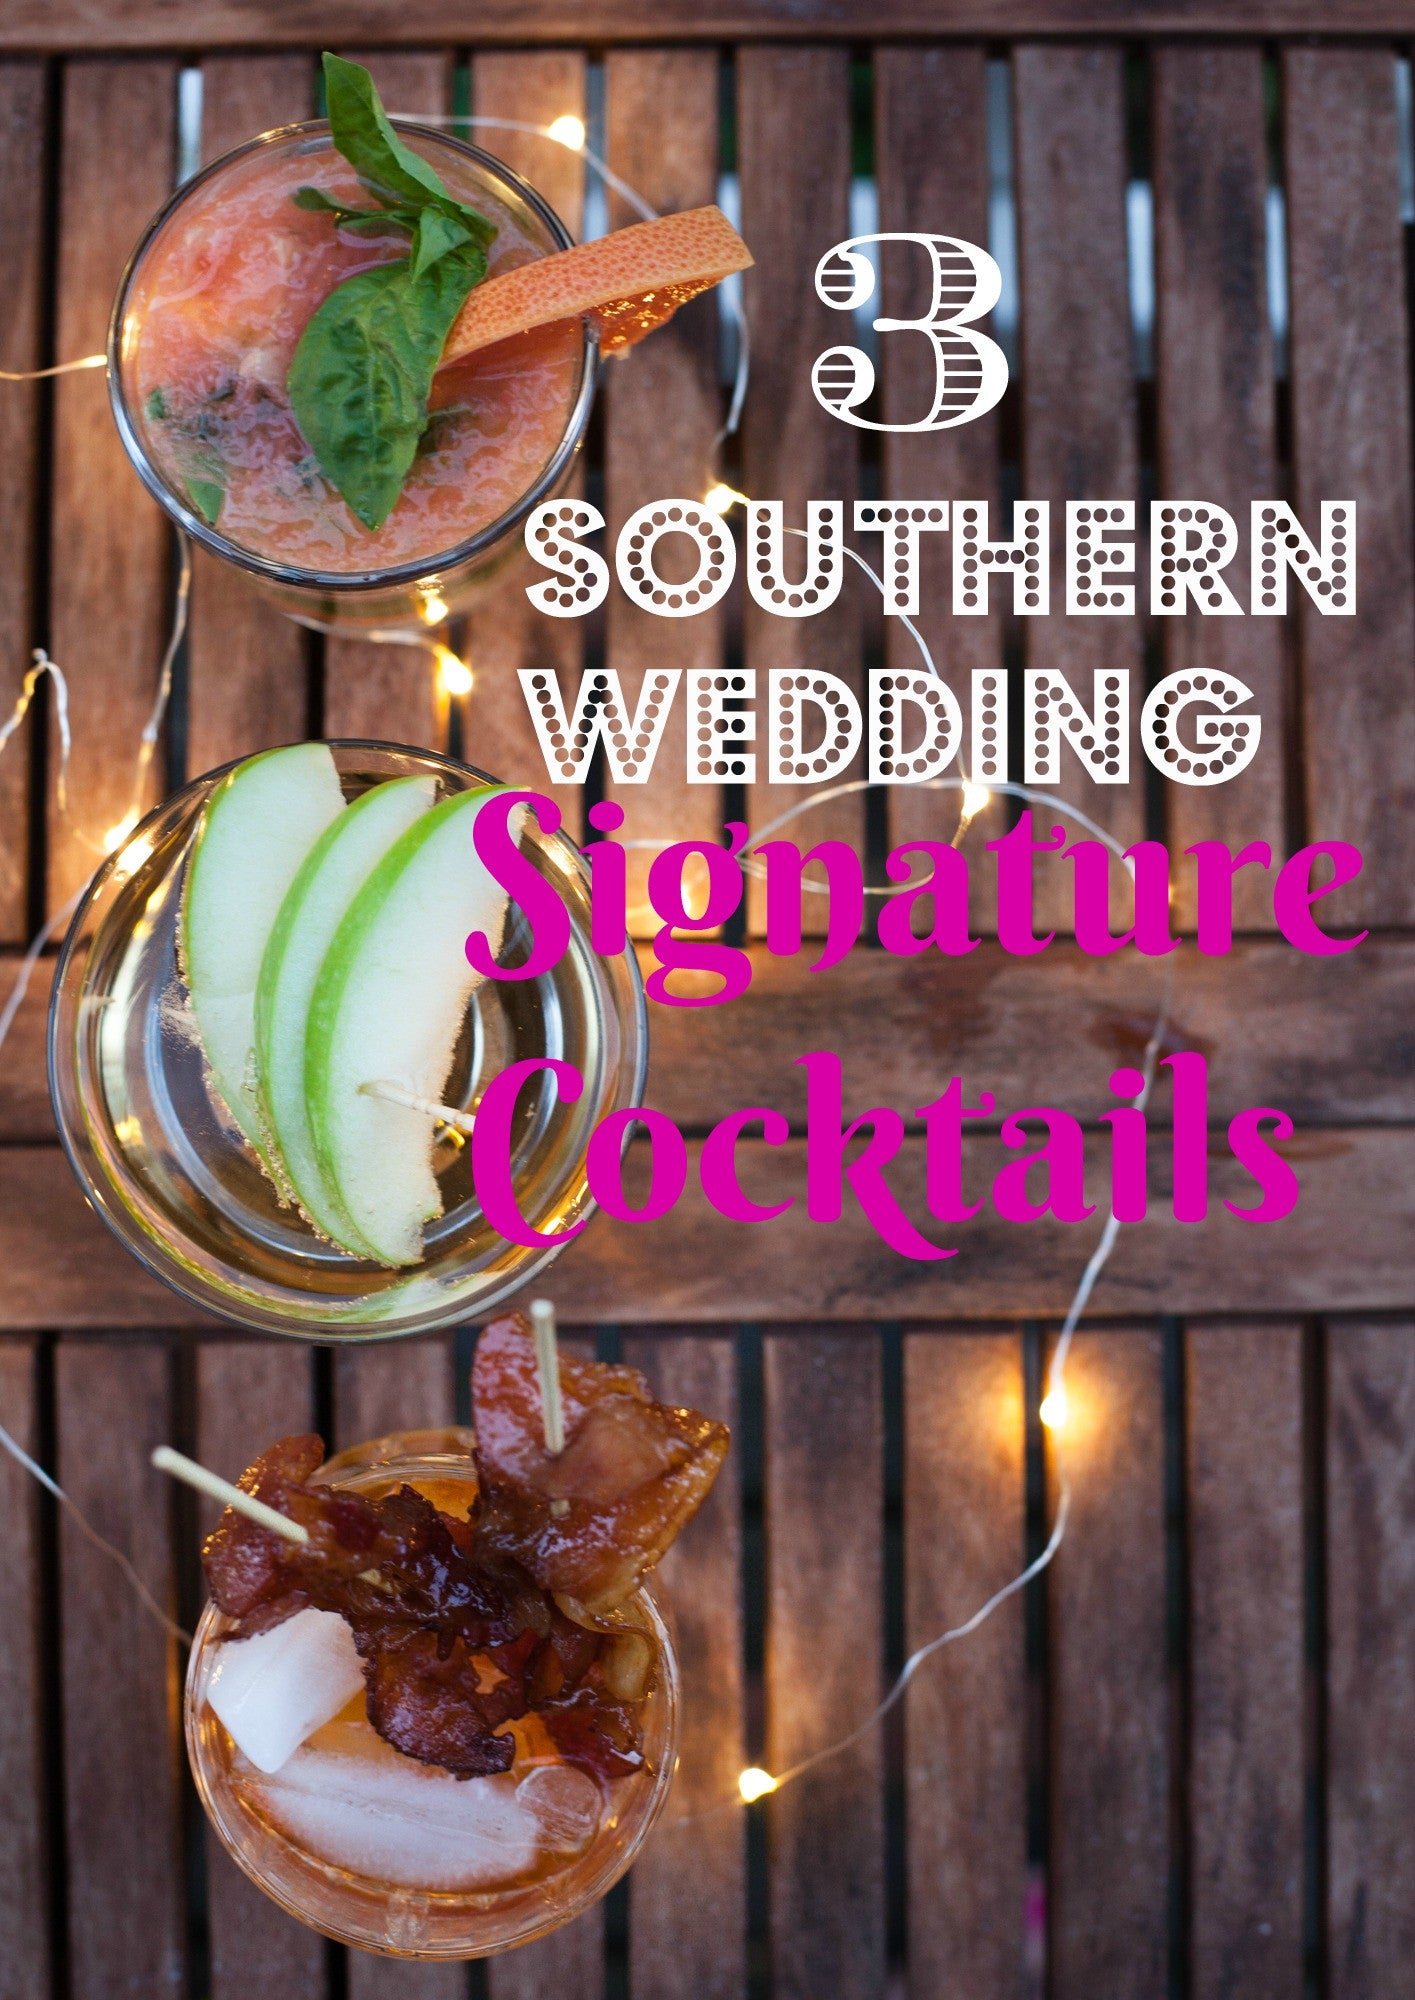 3 Southern Wedding Signature Cocktails